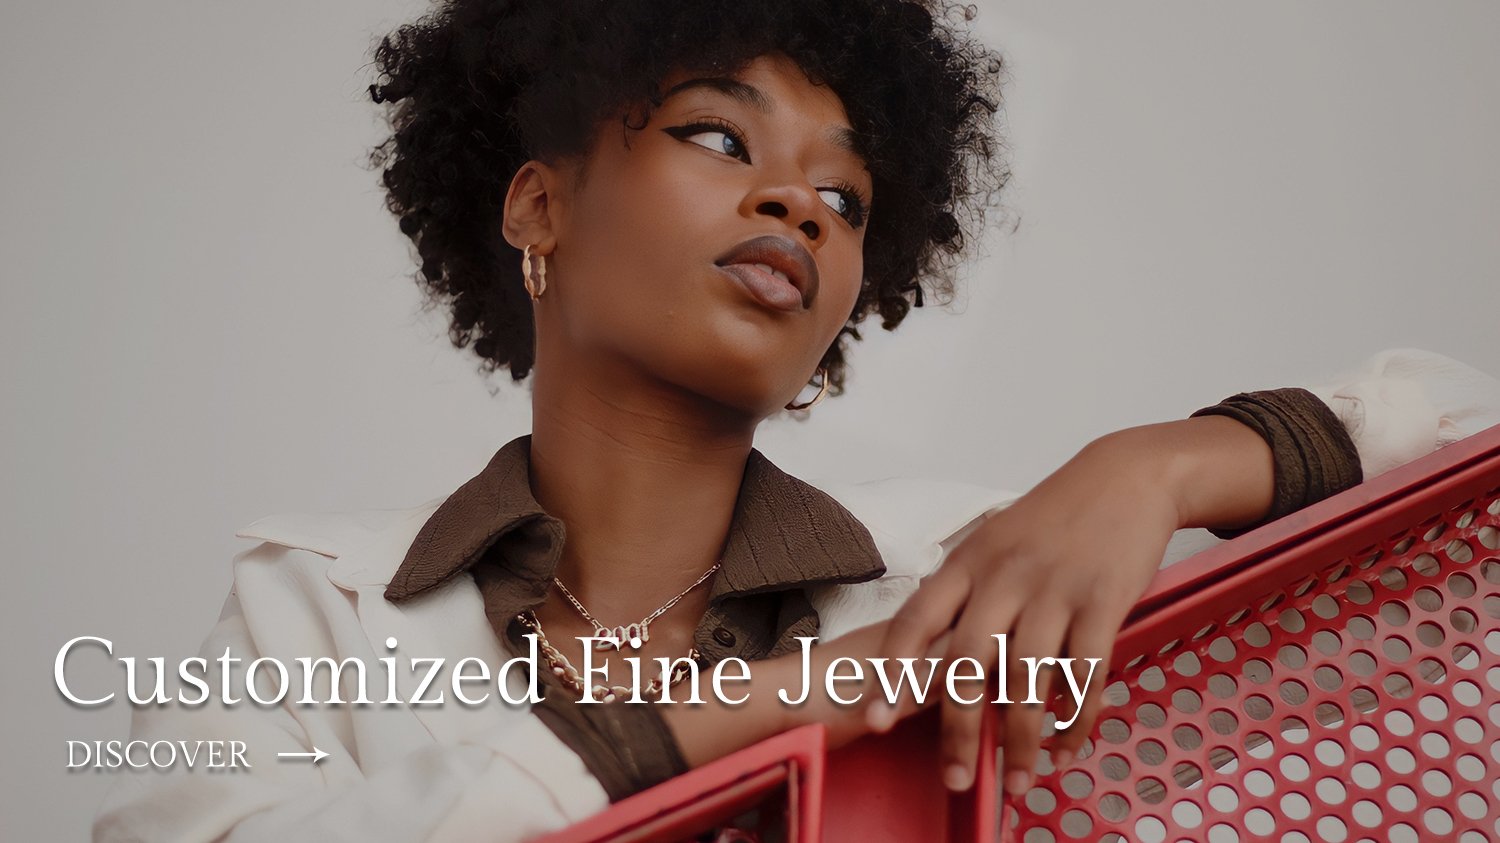 jewelry dropshipping business